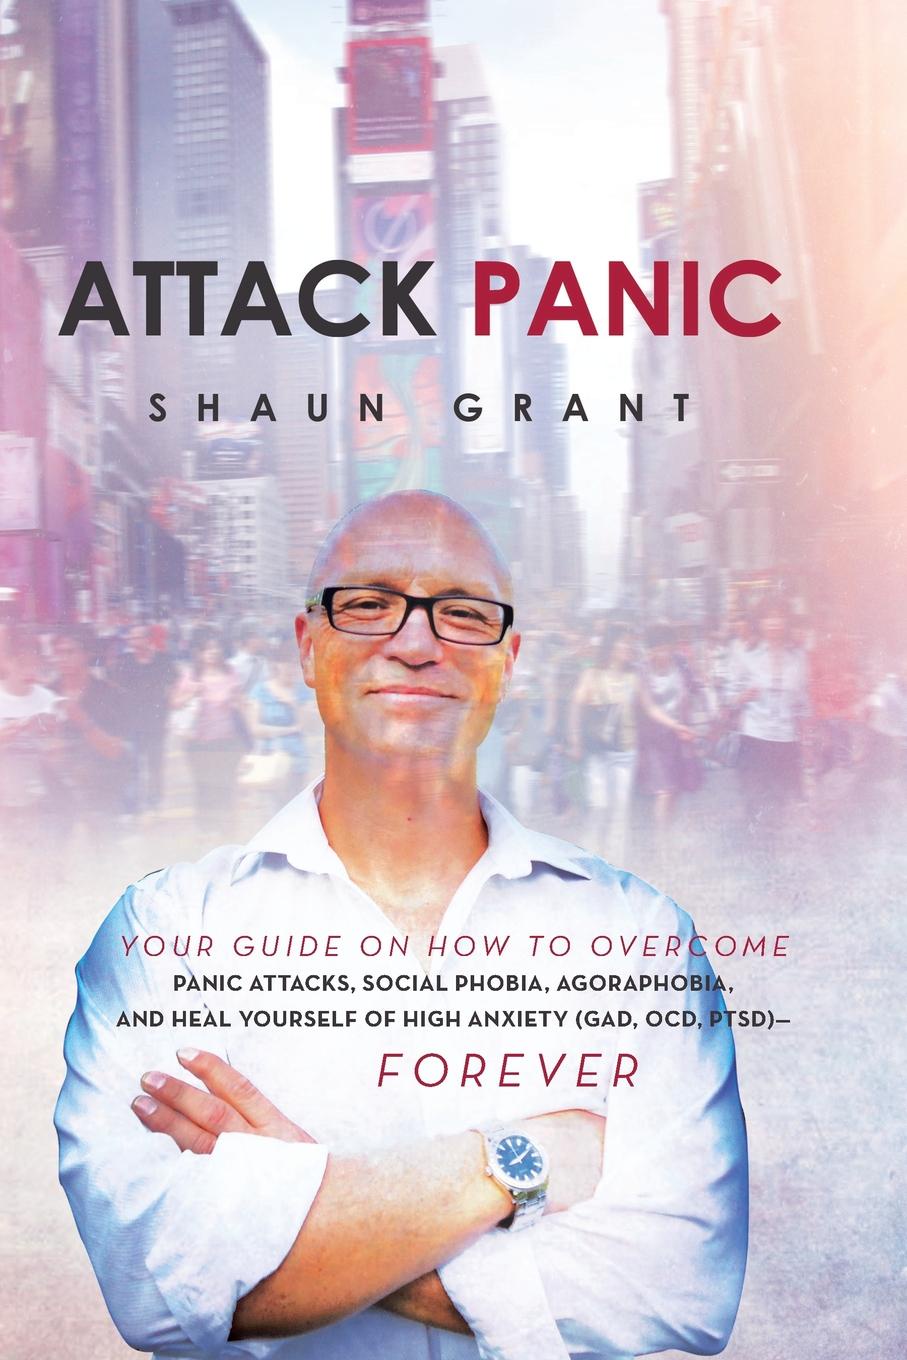 Attack Panic. Your Guide on How to Overcome Panic Attacks, Social Phobia, Agoraphobia, and Heal Yourself of High Anxiety (Gad, Ocd,